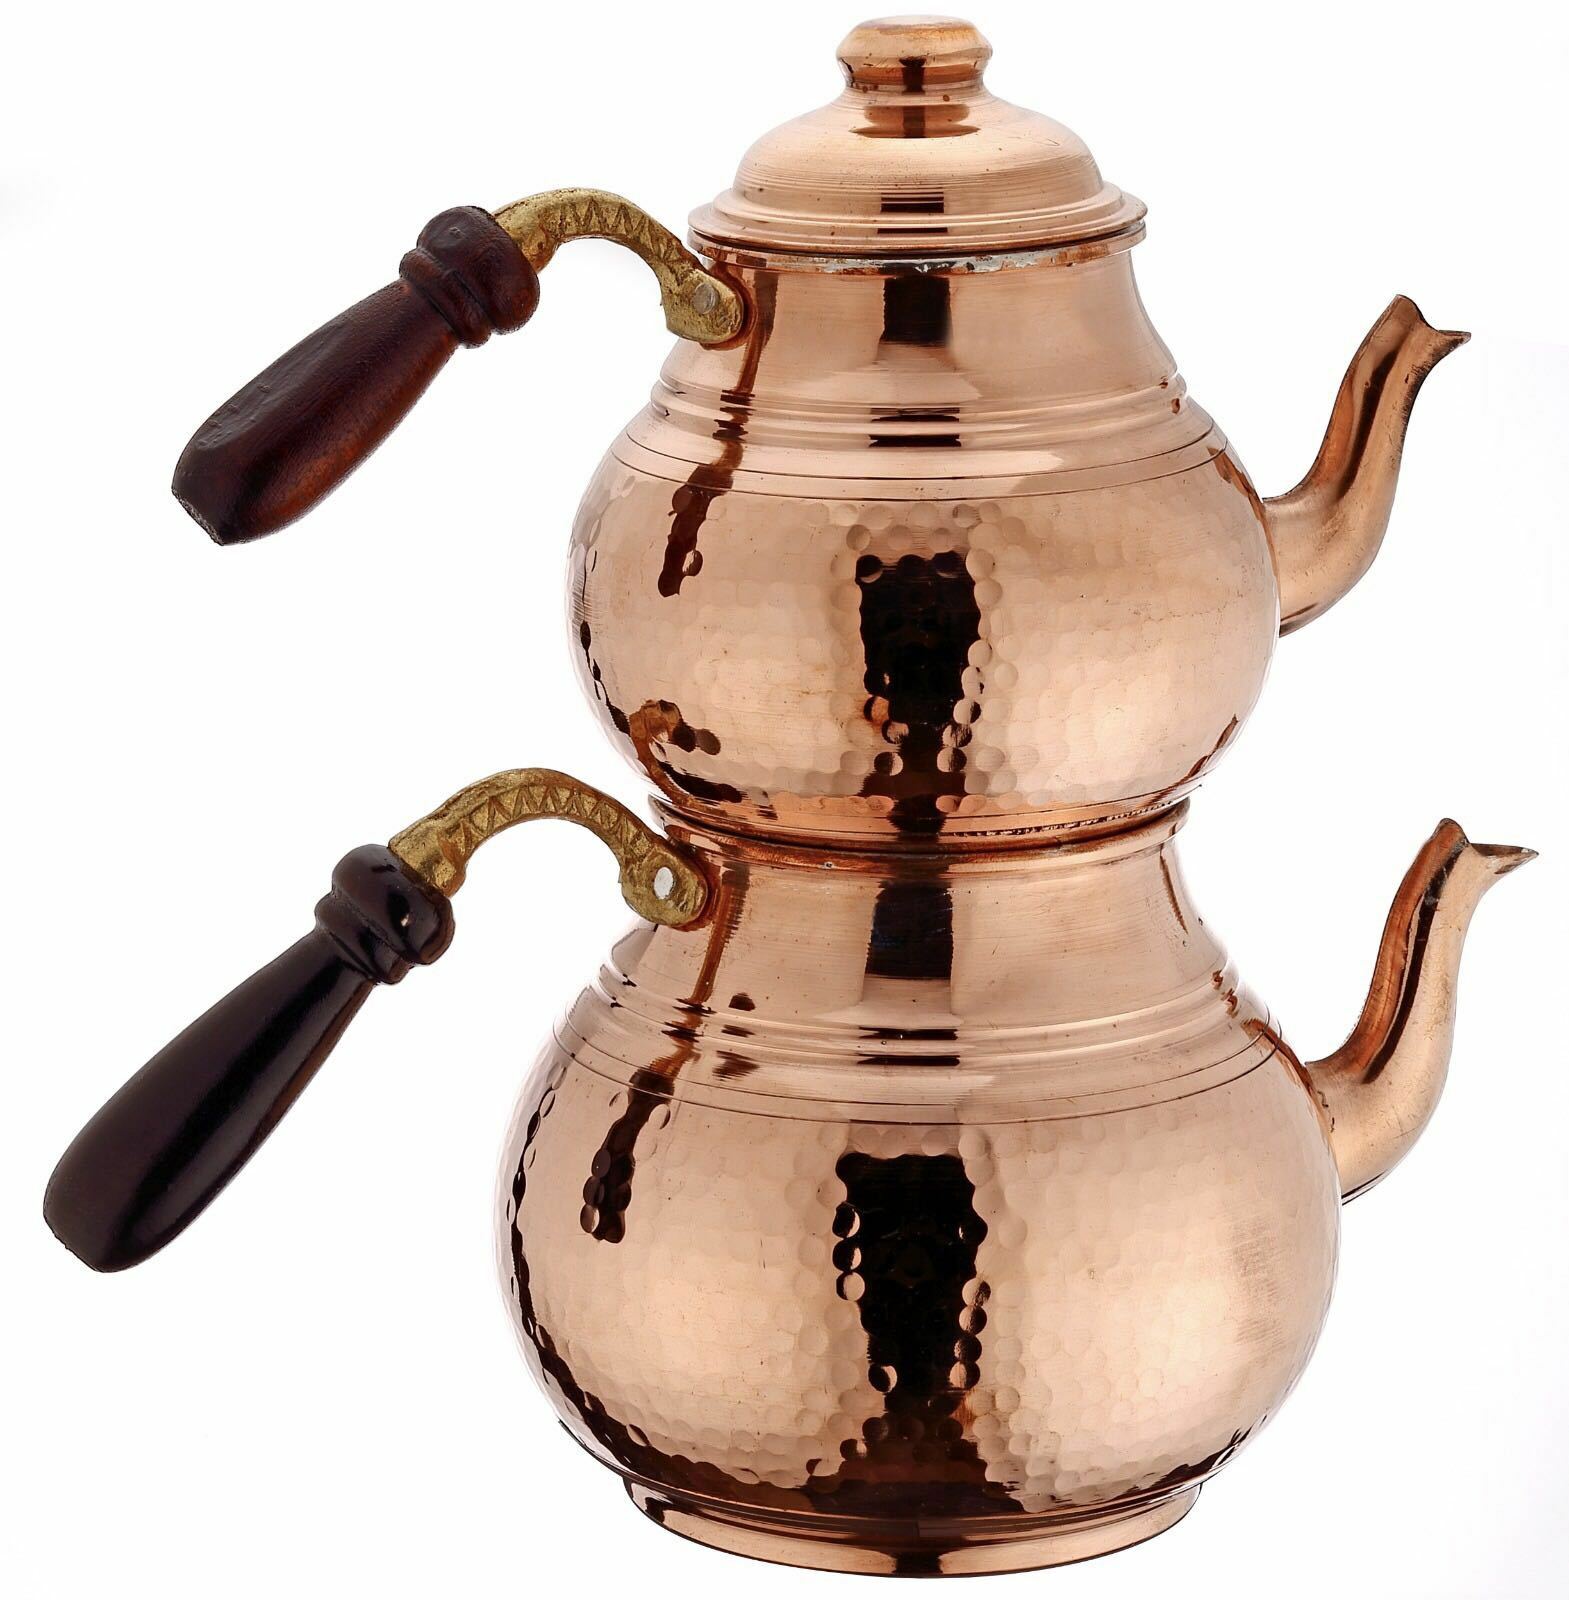 Copper tea pot 2 sizes traditional chinese turkish japanese arabic wooden handle